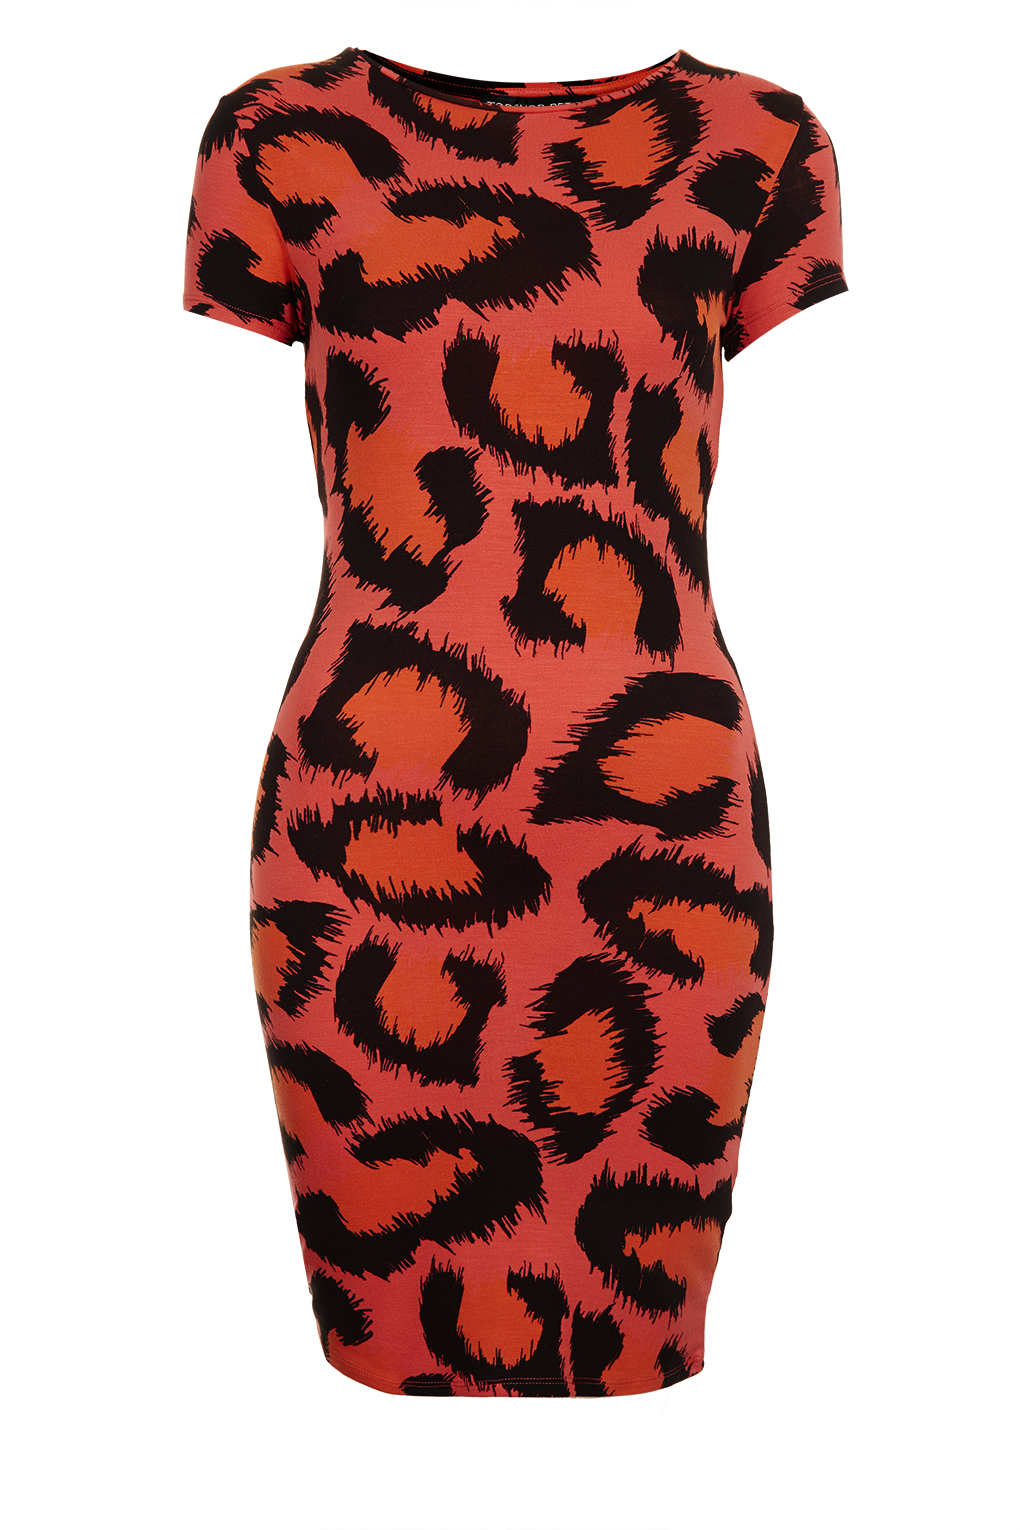 Lyst - Topshop Petite Leopard Bodycon Dress in Red